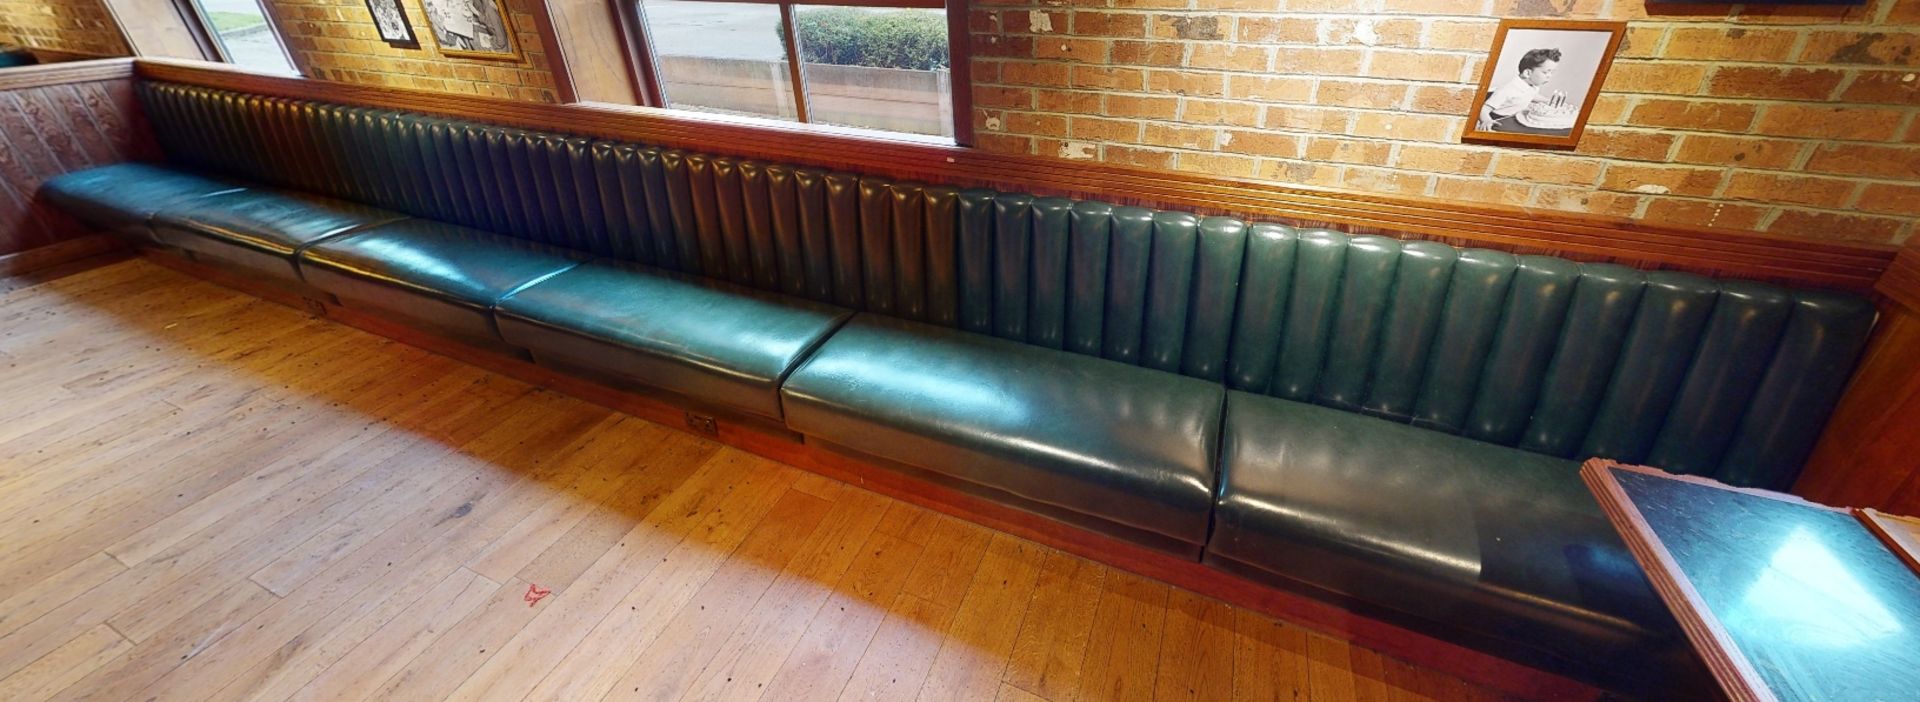 6 x Sections of Restarant Booth Seating Upholstered In Green Faux Leather With Vertical Fluted Backs - Image 5 of 6